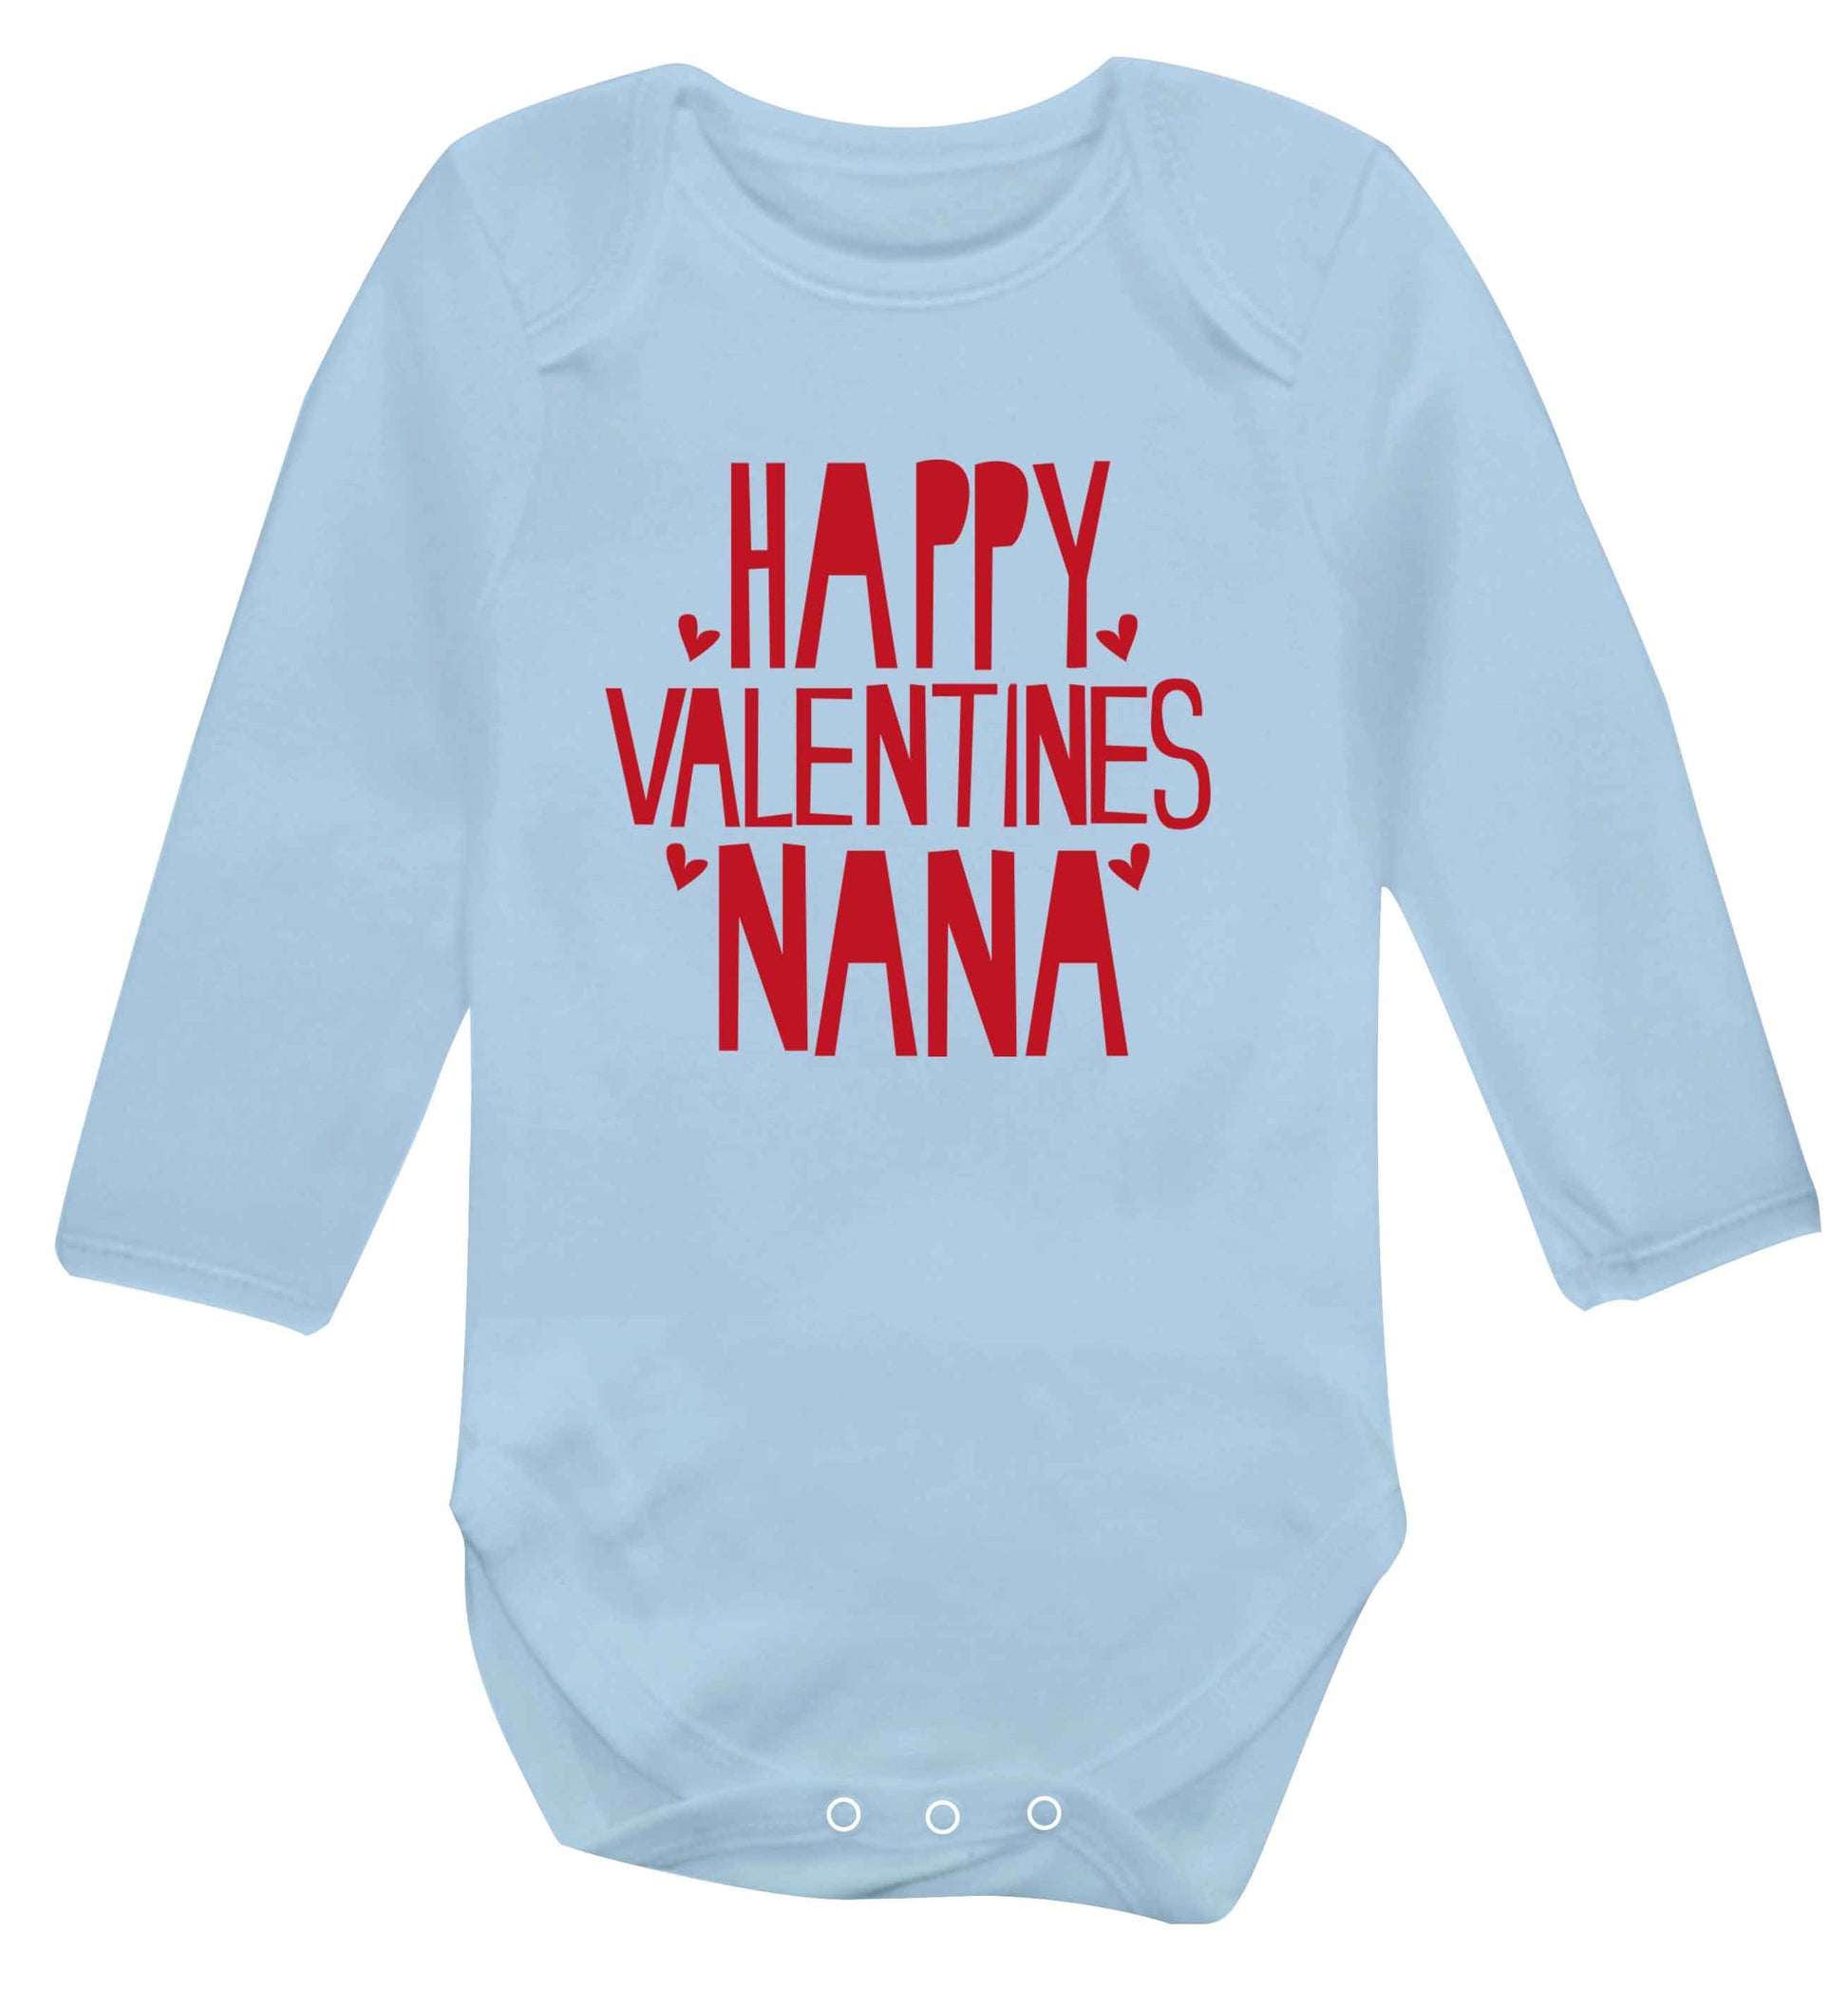 Happy valentines nana baby vest long sleeved pale blue 6-12 months